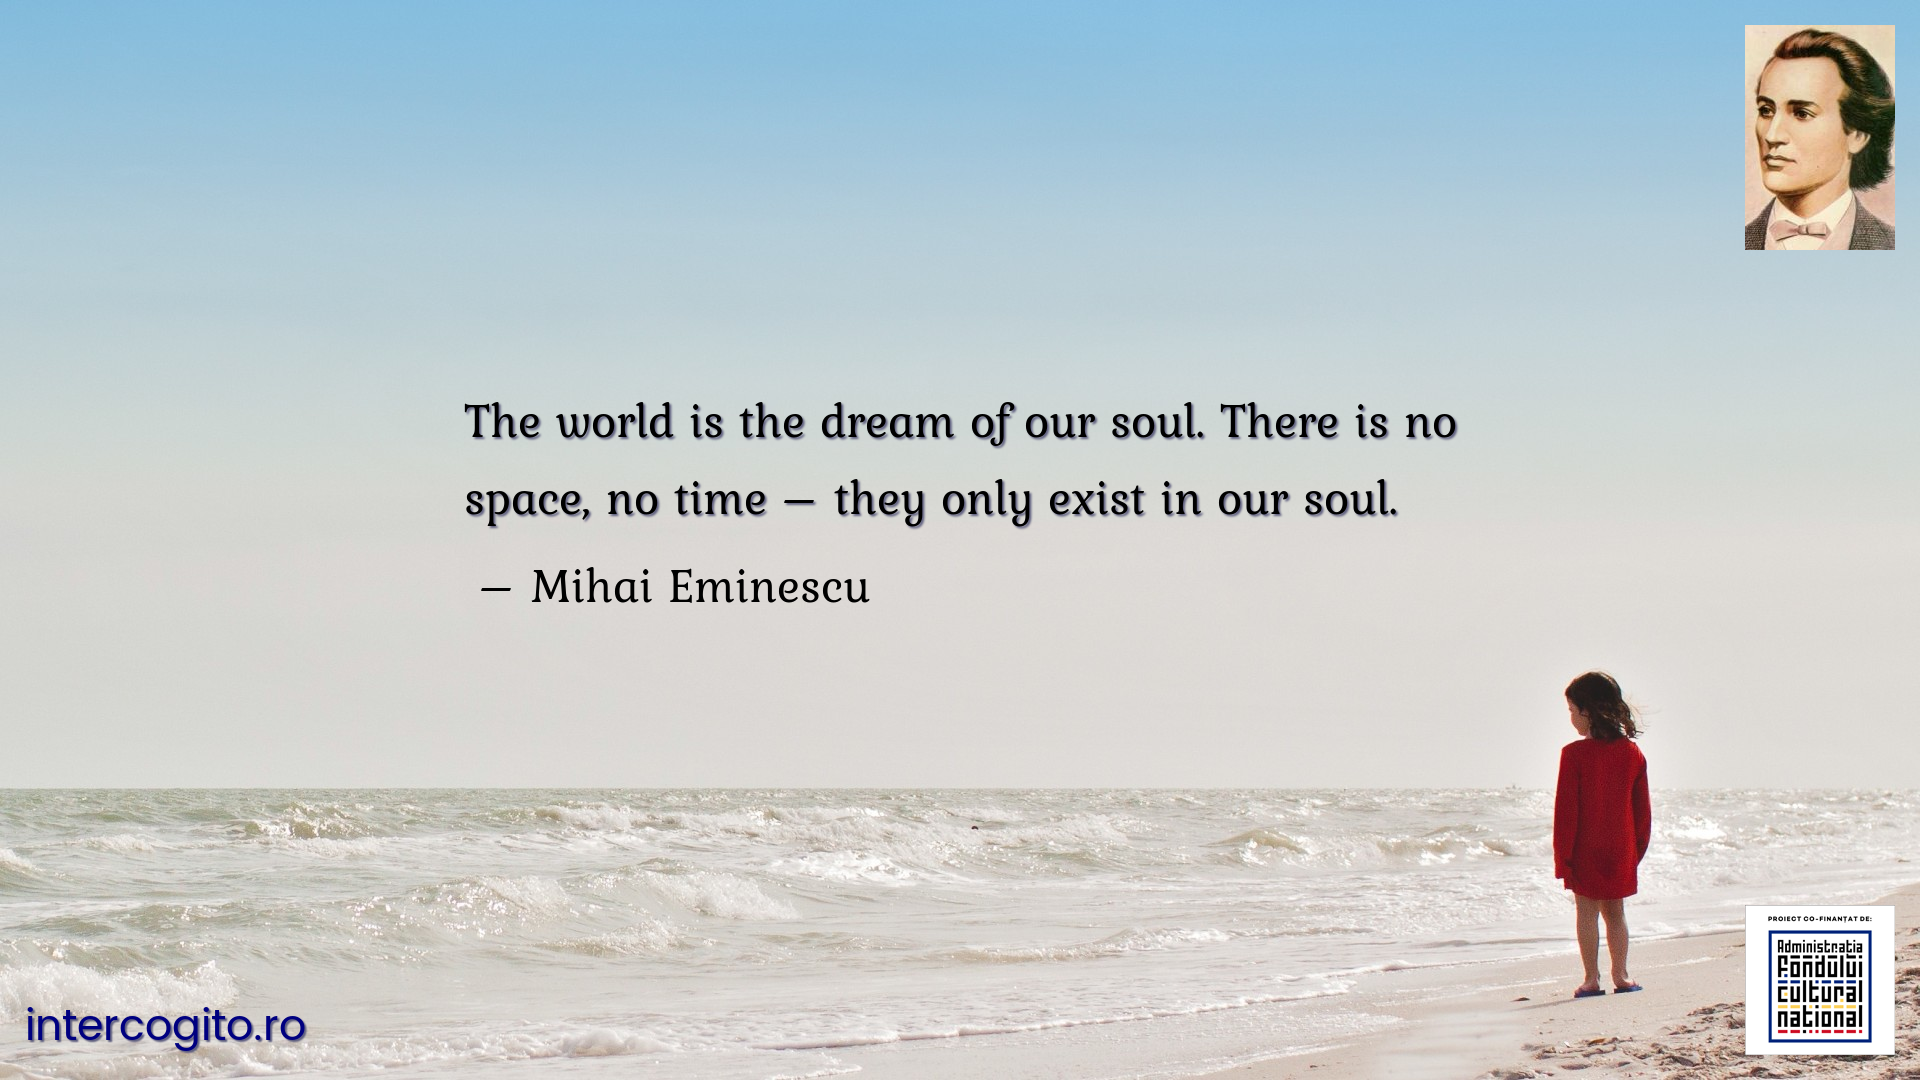 The world is the dream of our soul. There is no space, no time – they only exist in our soul.